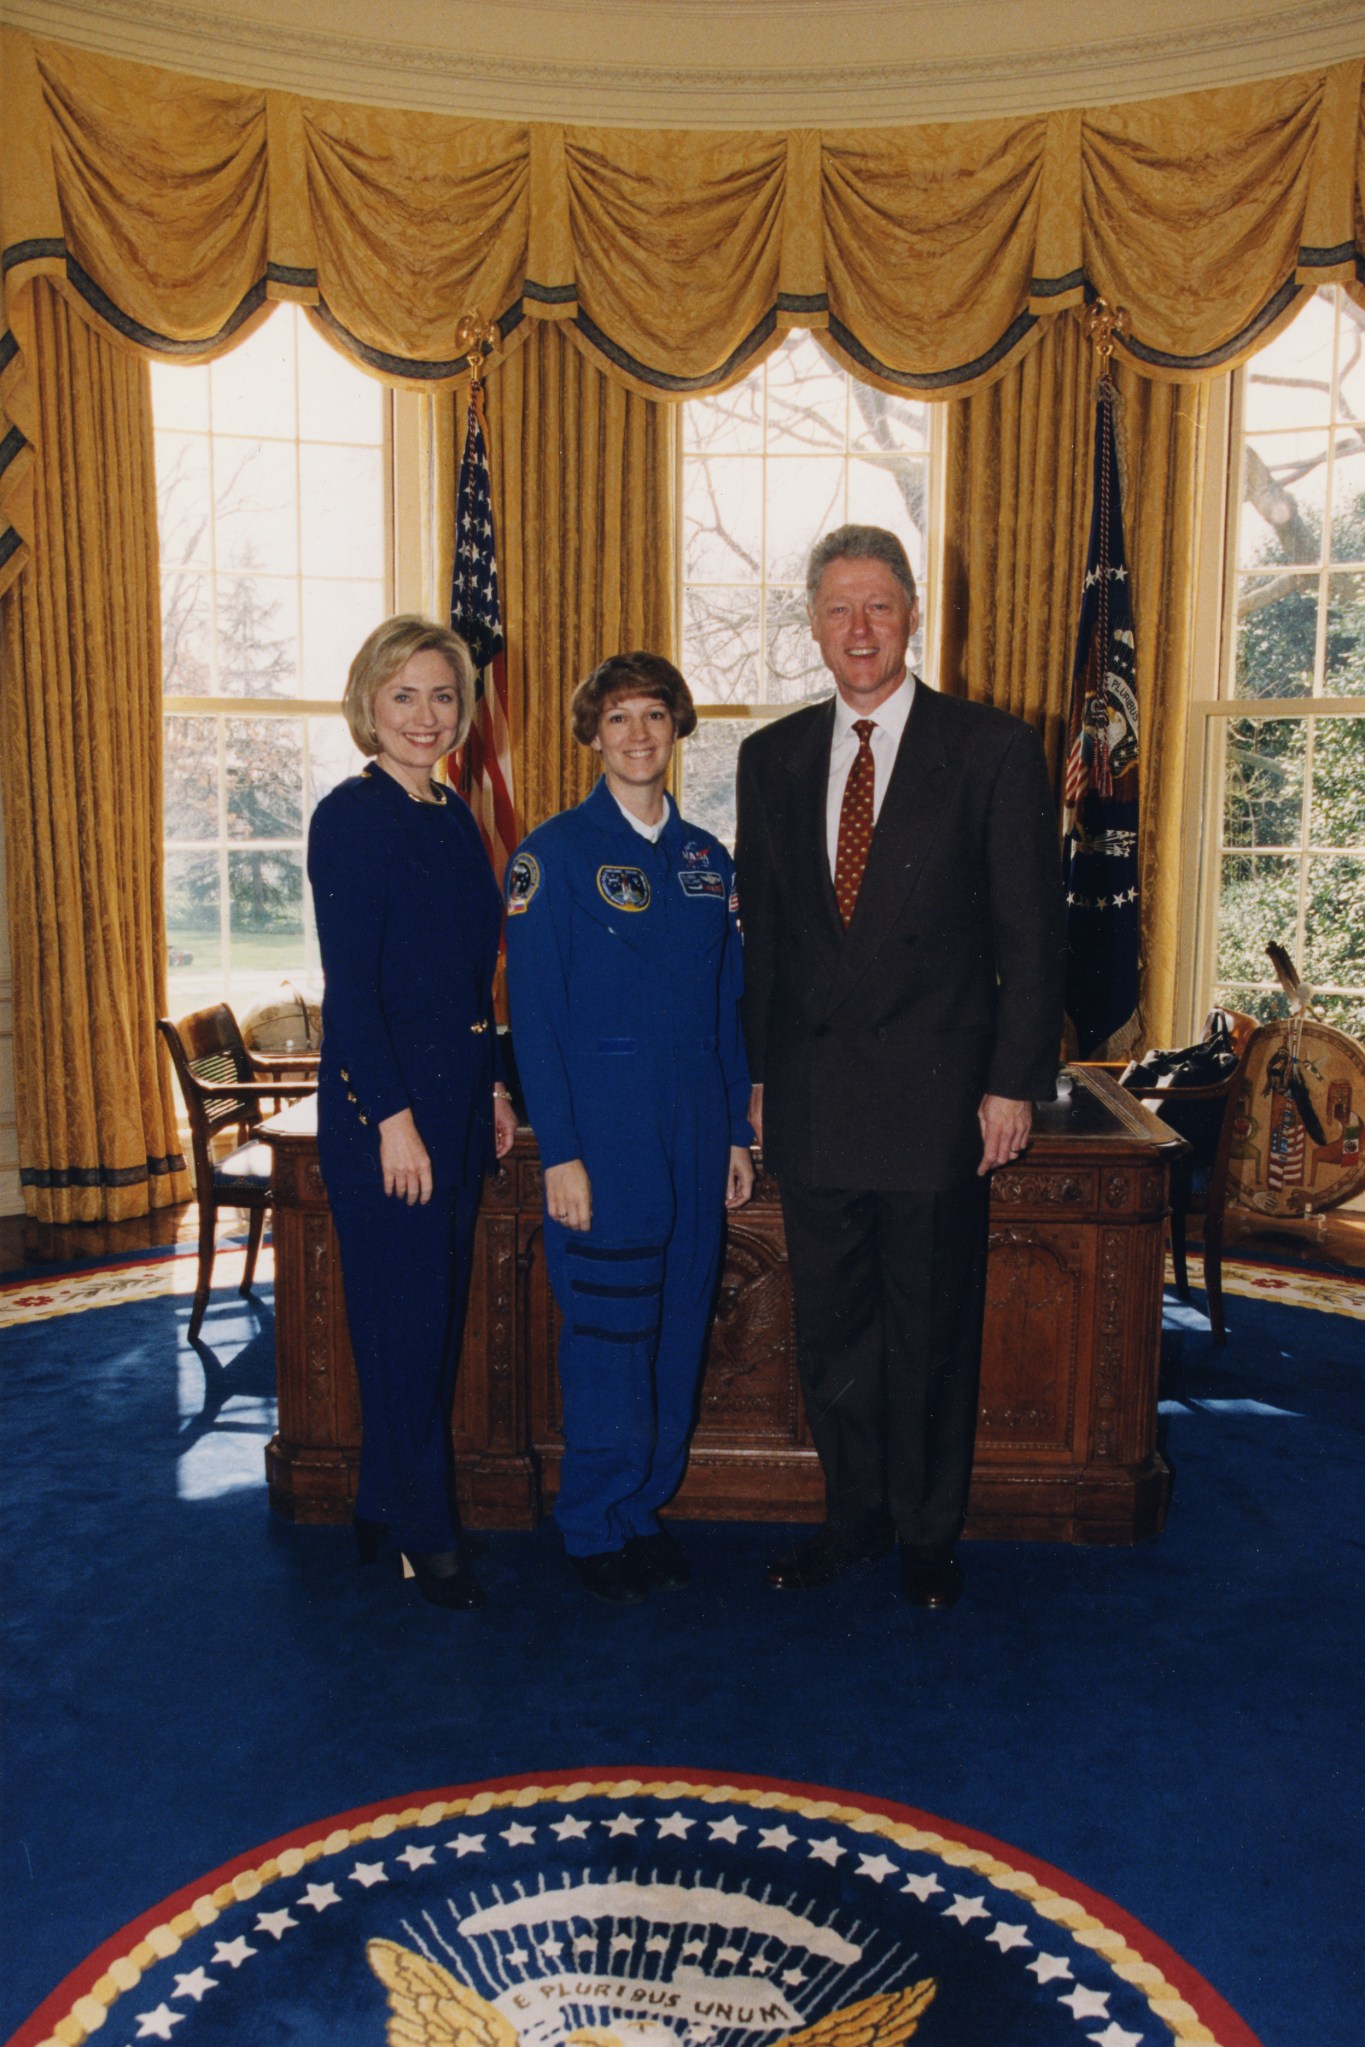 Hillary Clinton, Eileen Collins, and President Bill Clinton in the Oval Office